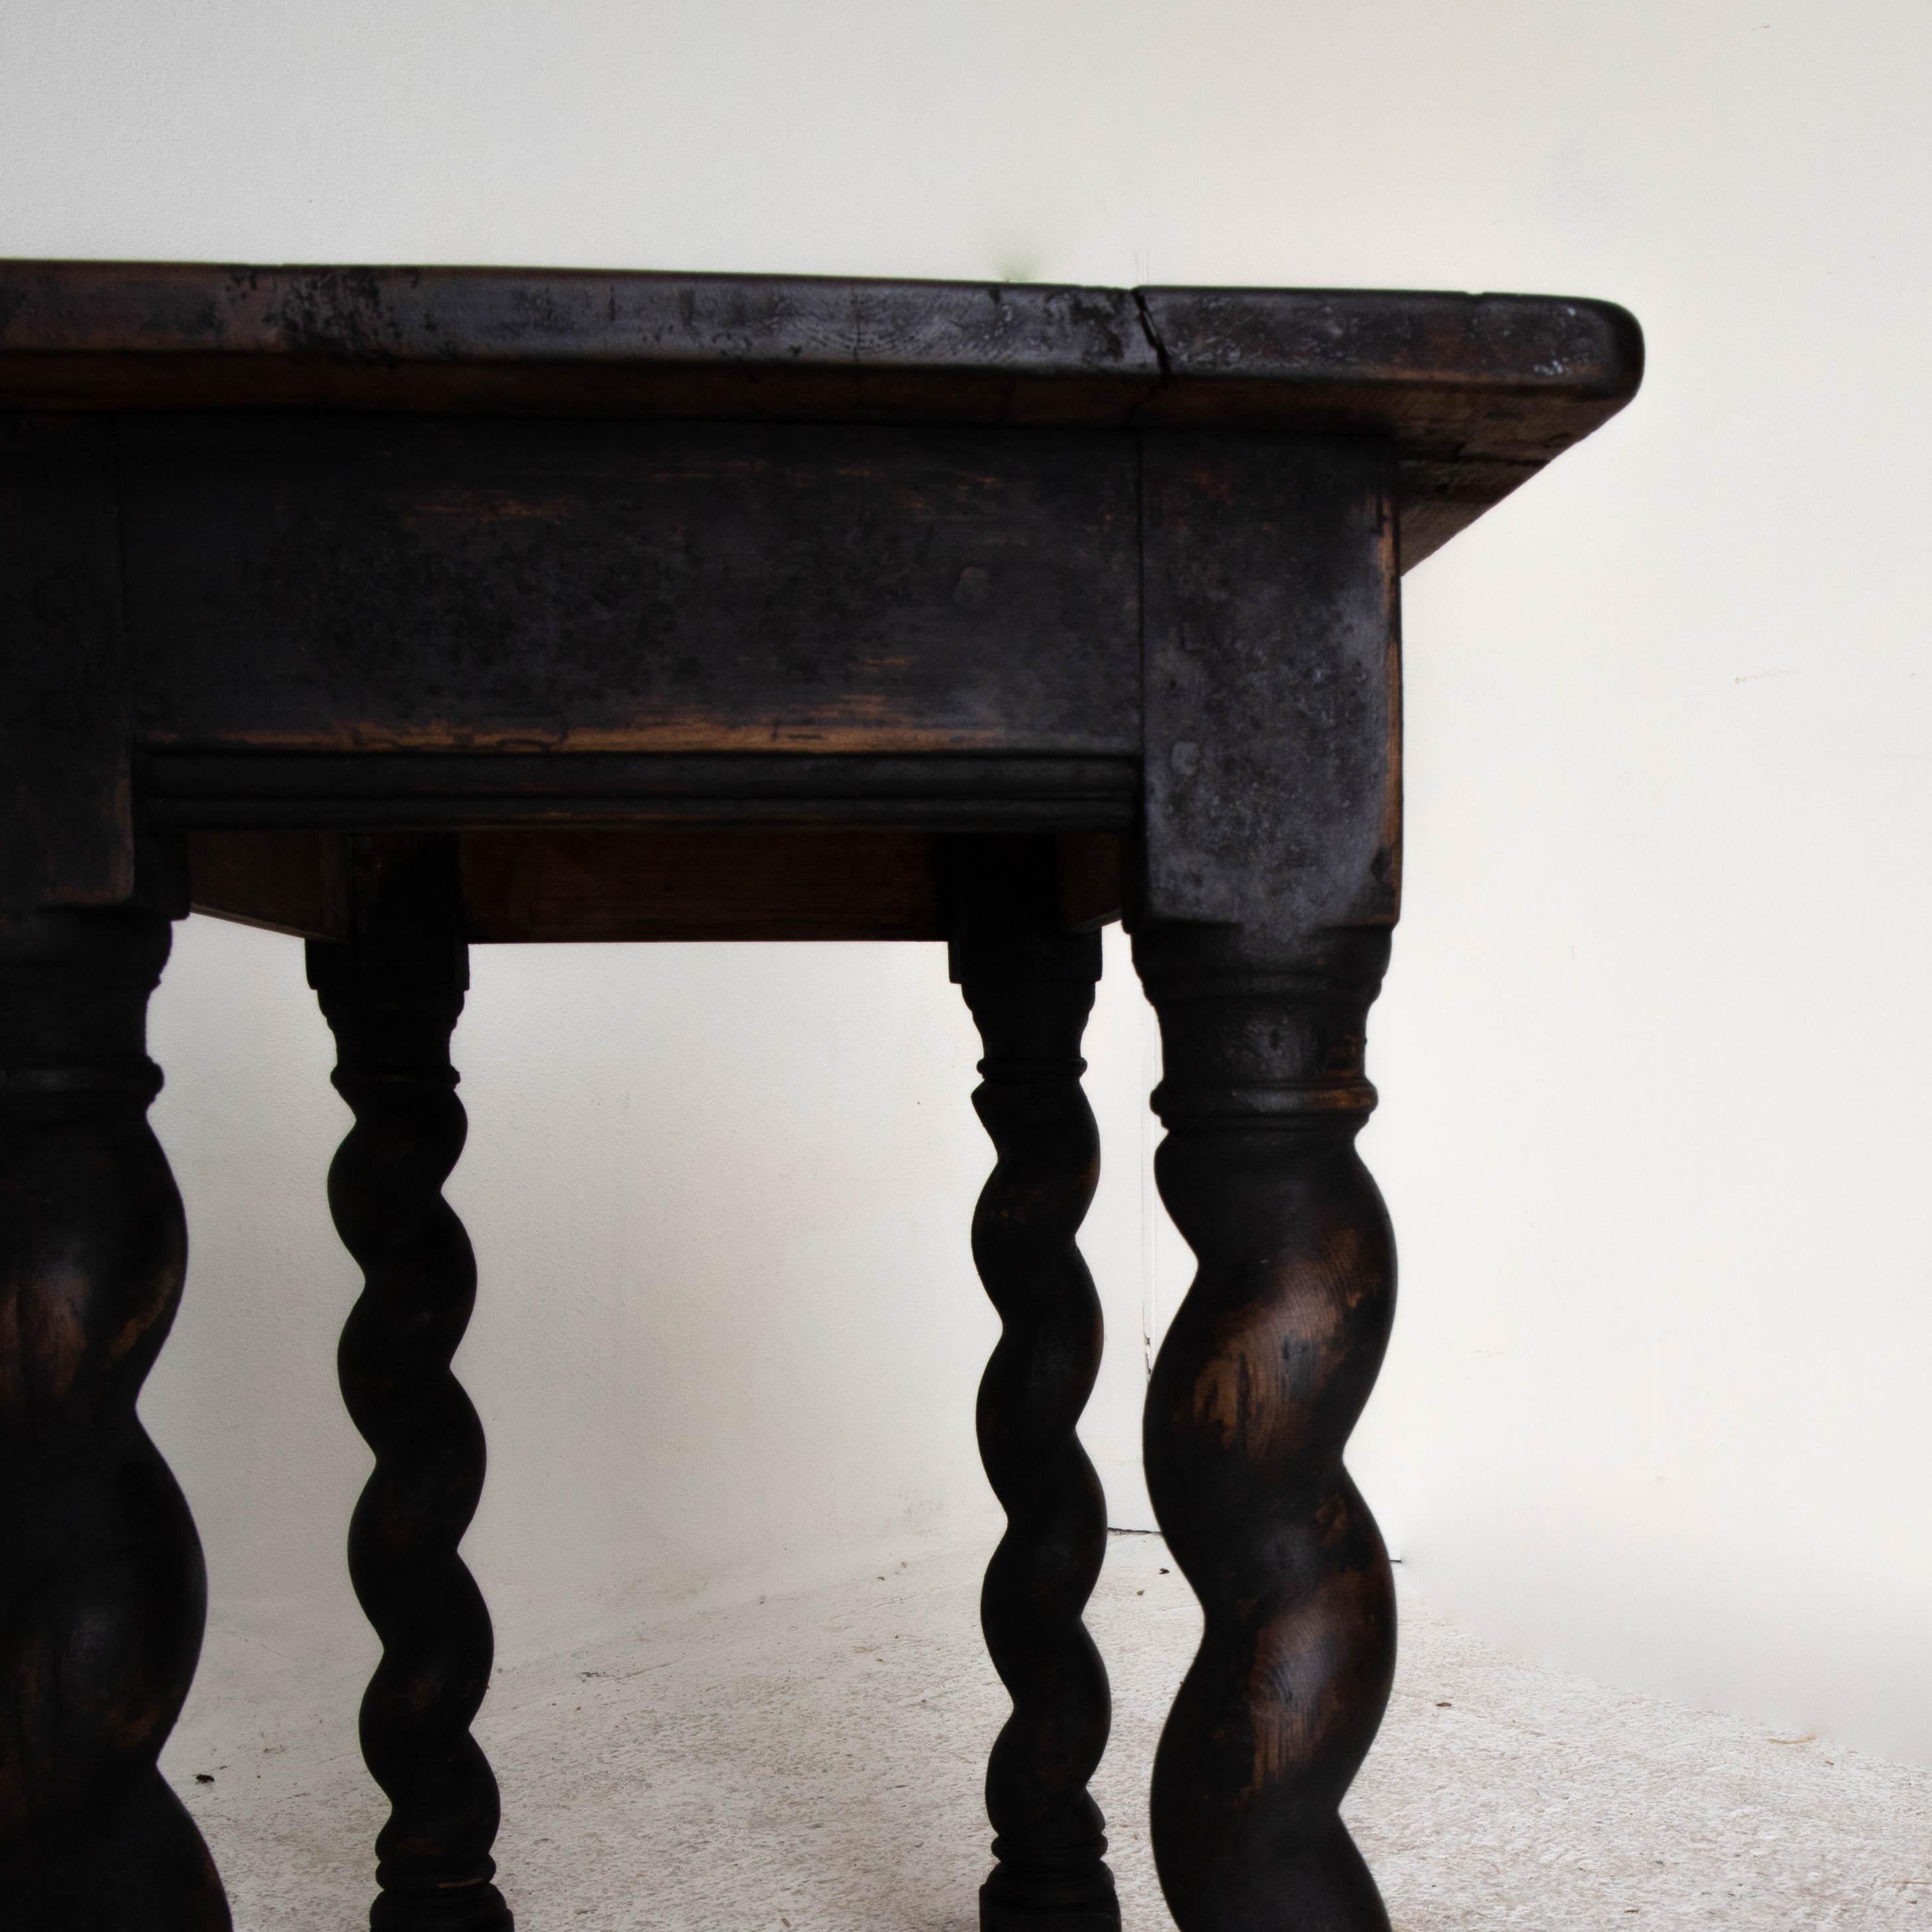 Hand-Painted Table Side Swedish Baroque Black 18th Cenutry Spiral Legs, Sweden